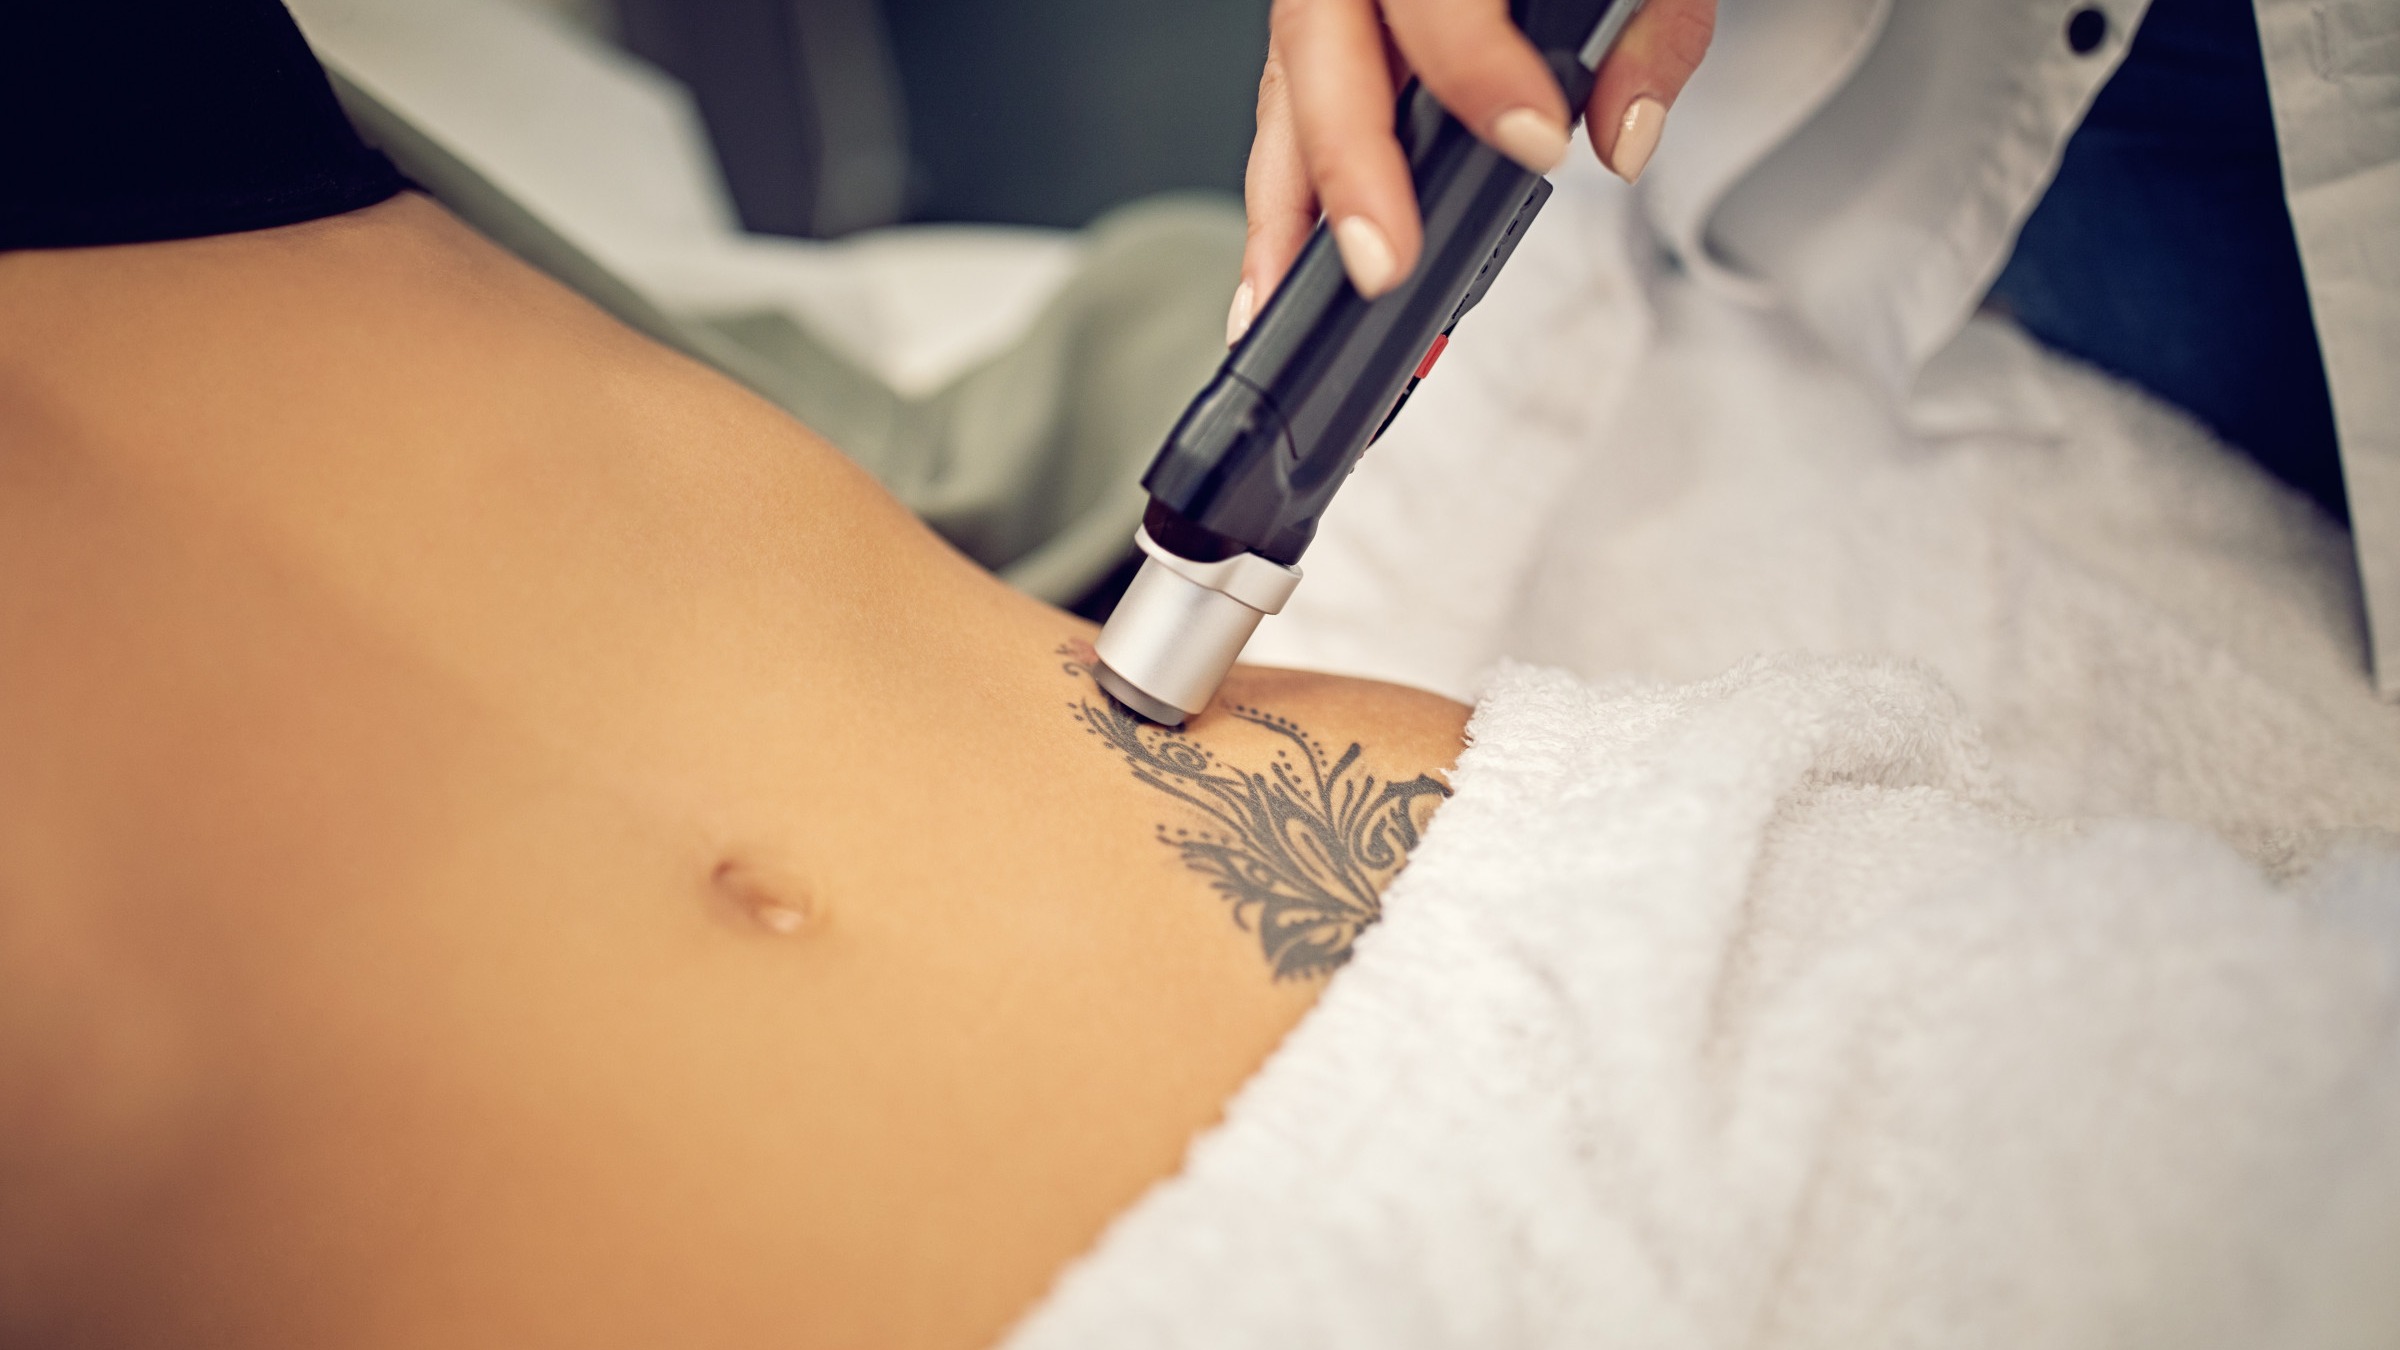 How Can A Healthy Lifestyle Speed Up Your Tattoo Removal